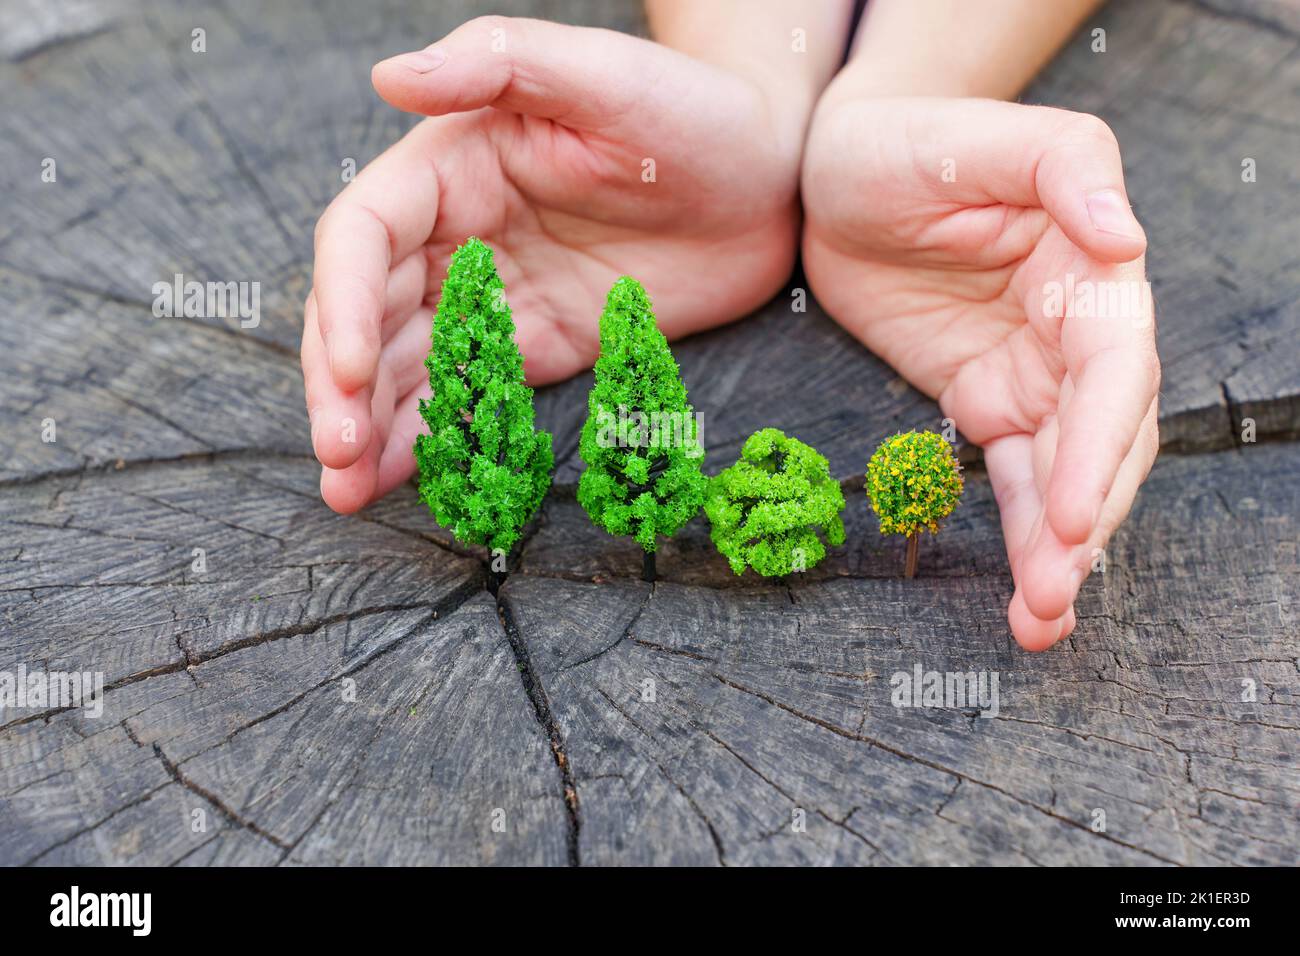 Woman covers toy trees placed on a tree stump outdoors. Forest protection concept. Stock Photo